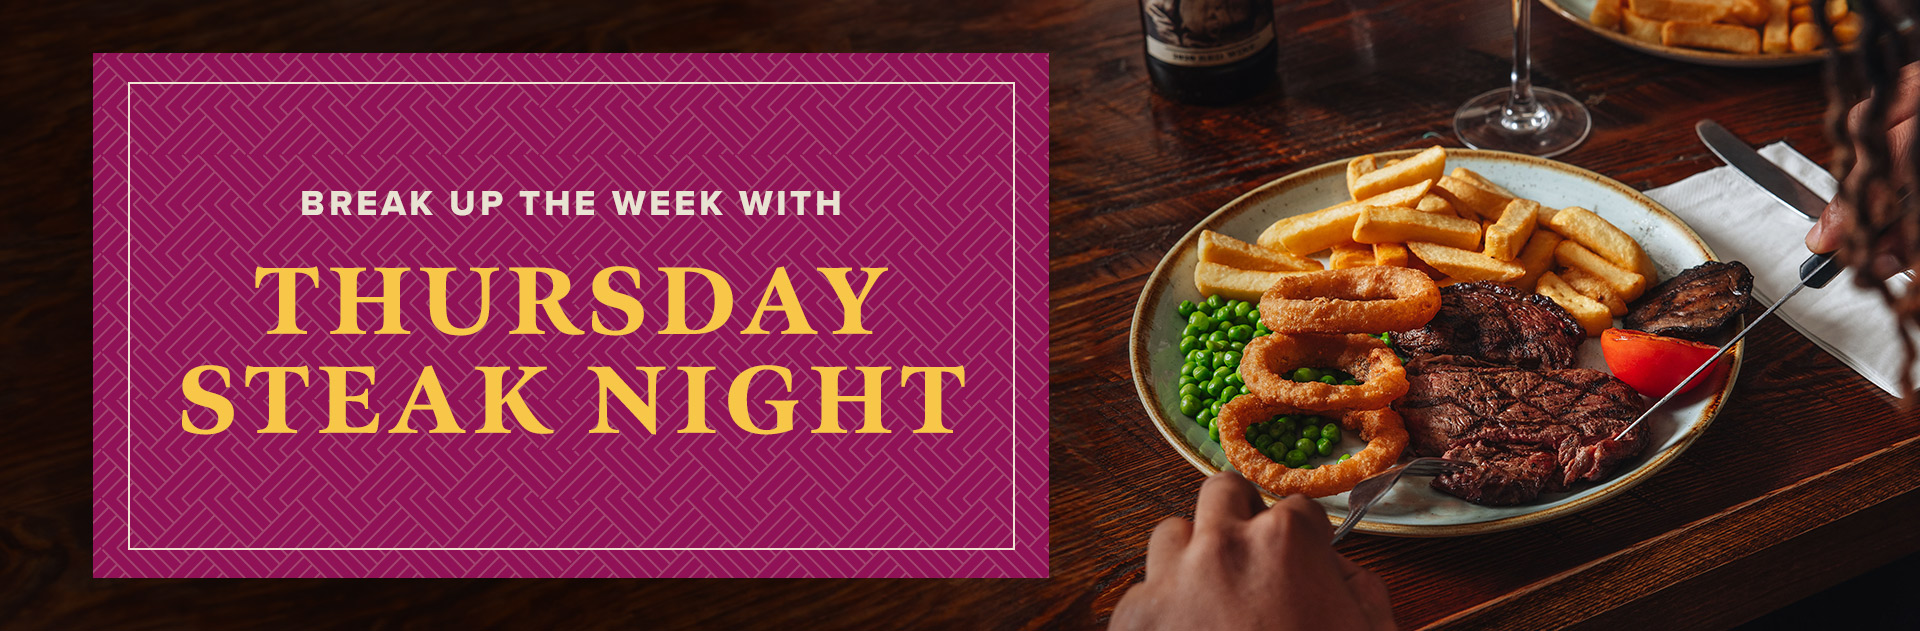 Thursday Steak Night at The Colebrook